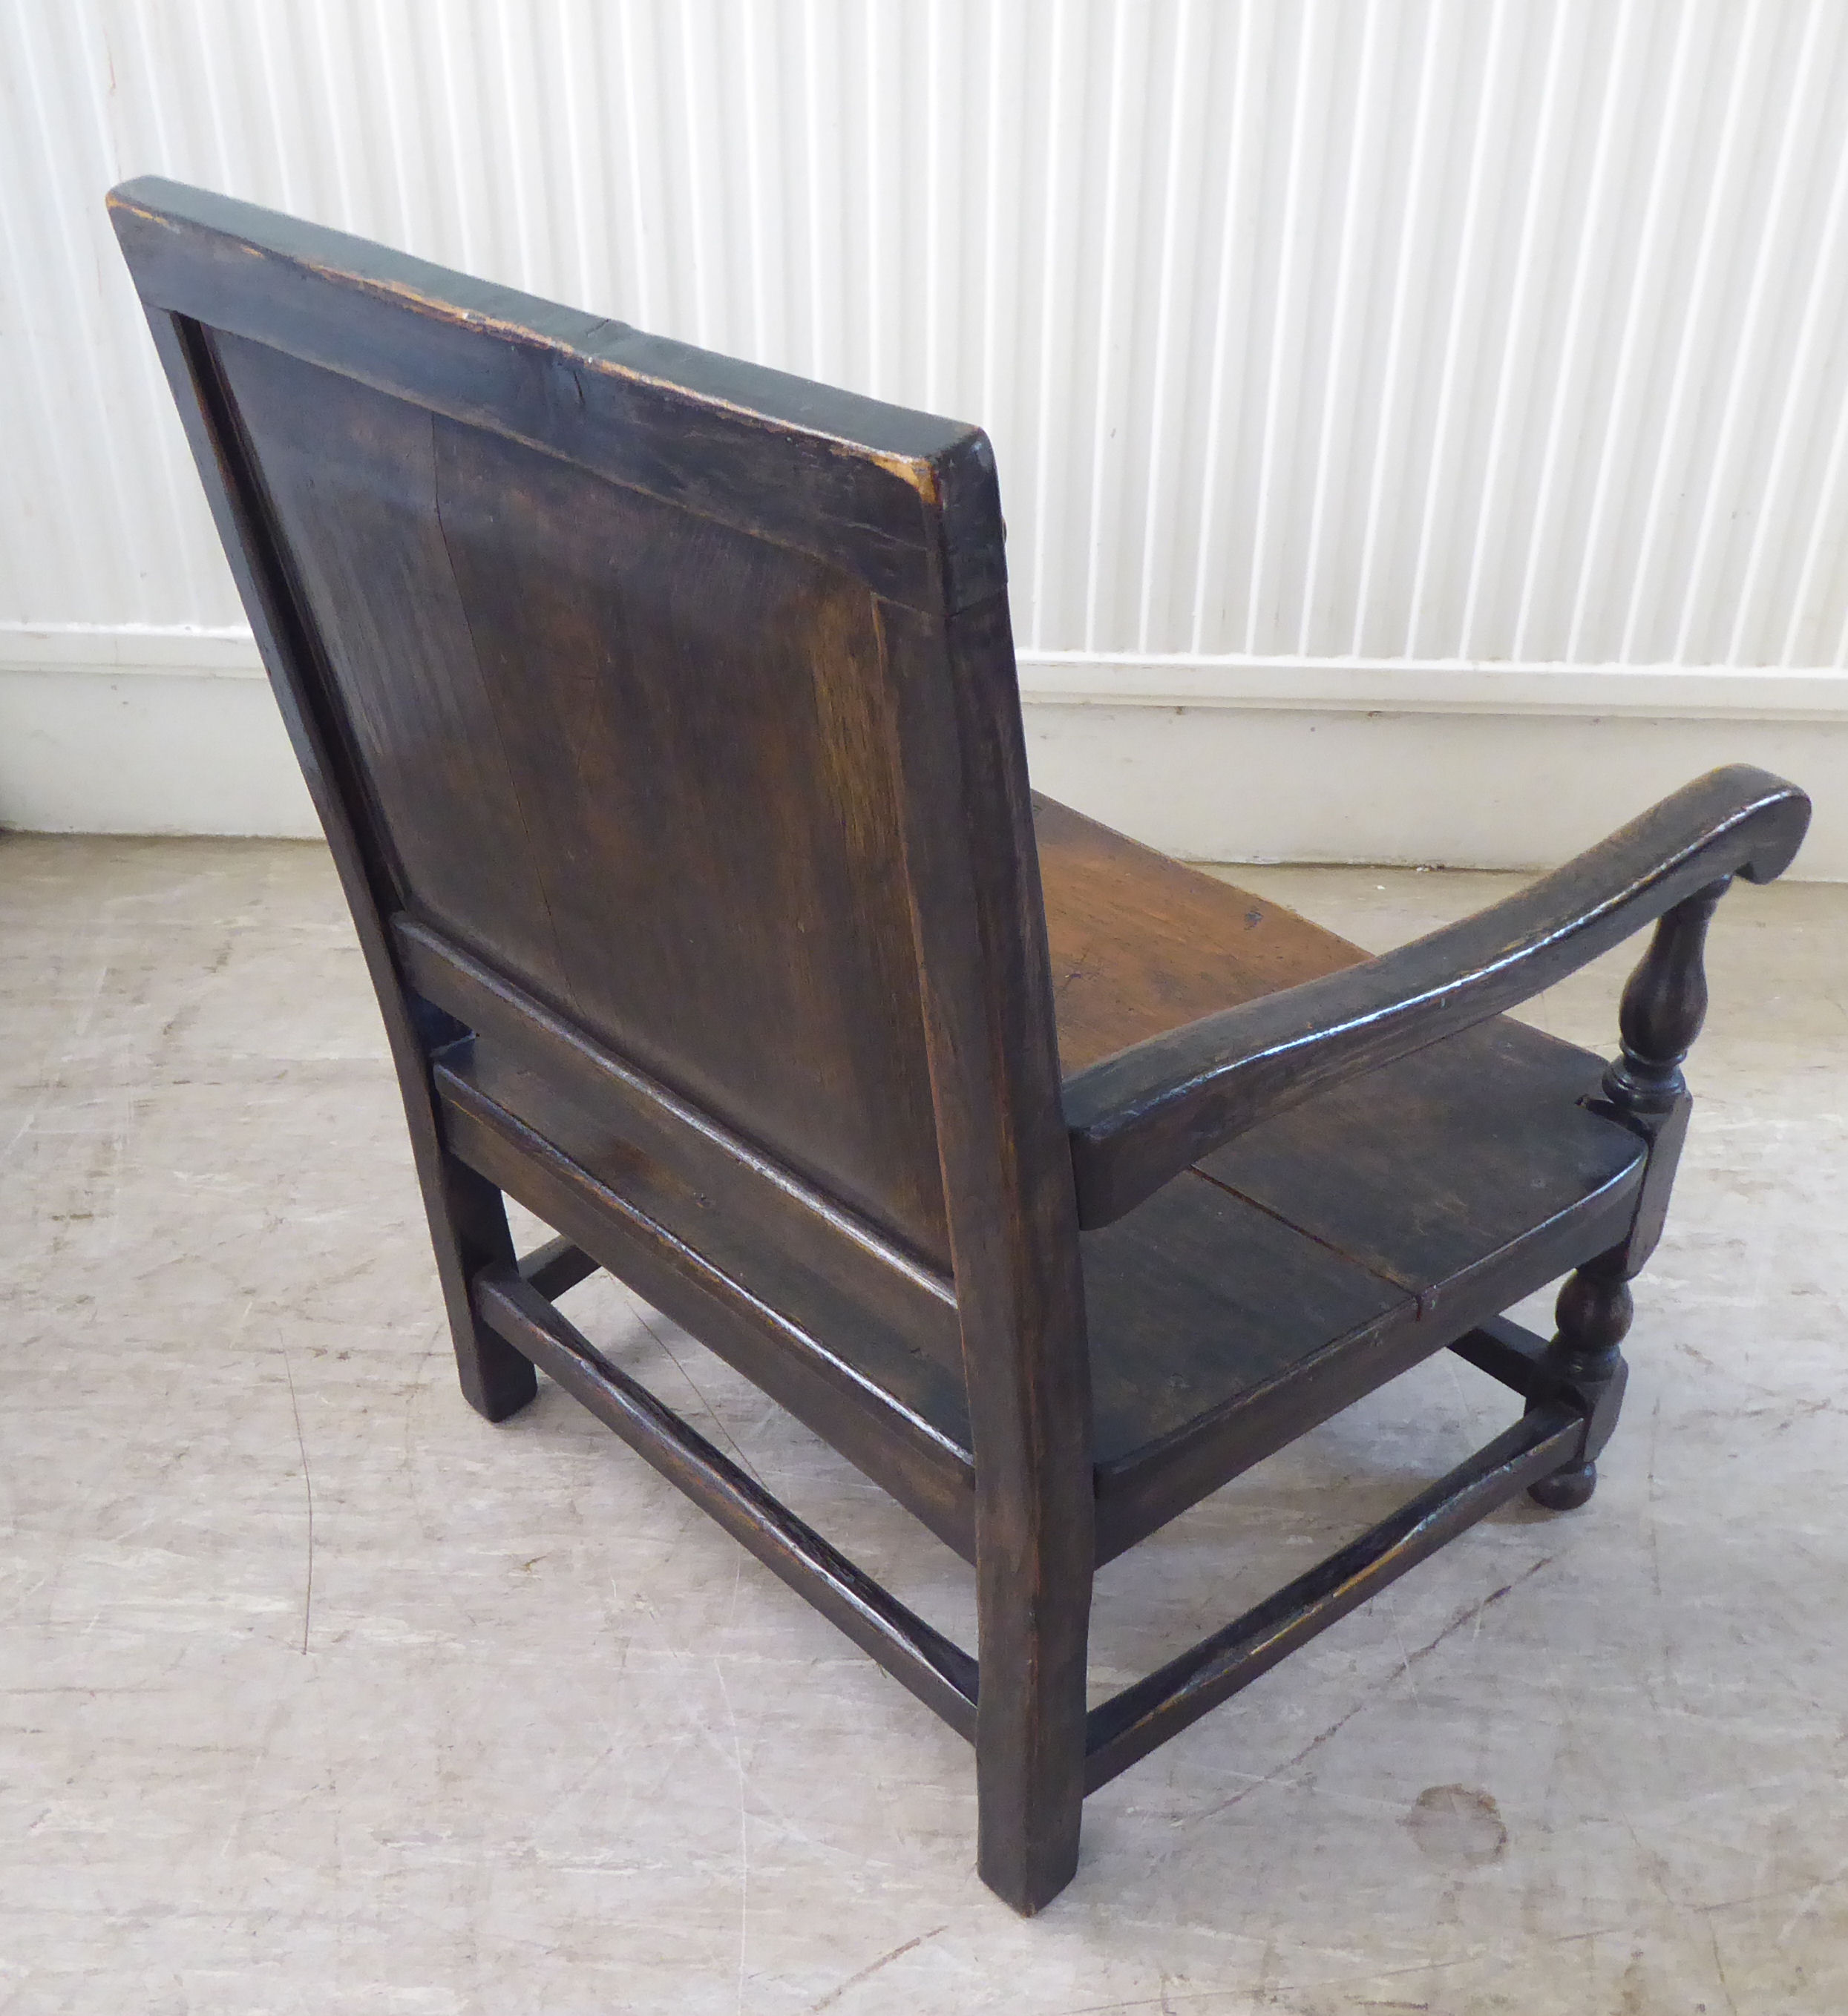 An antique finished, dark stained oak floral marquetry, panelled back, low, open arm chair with a - Image 4 of 5